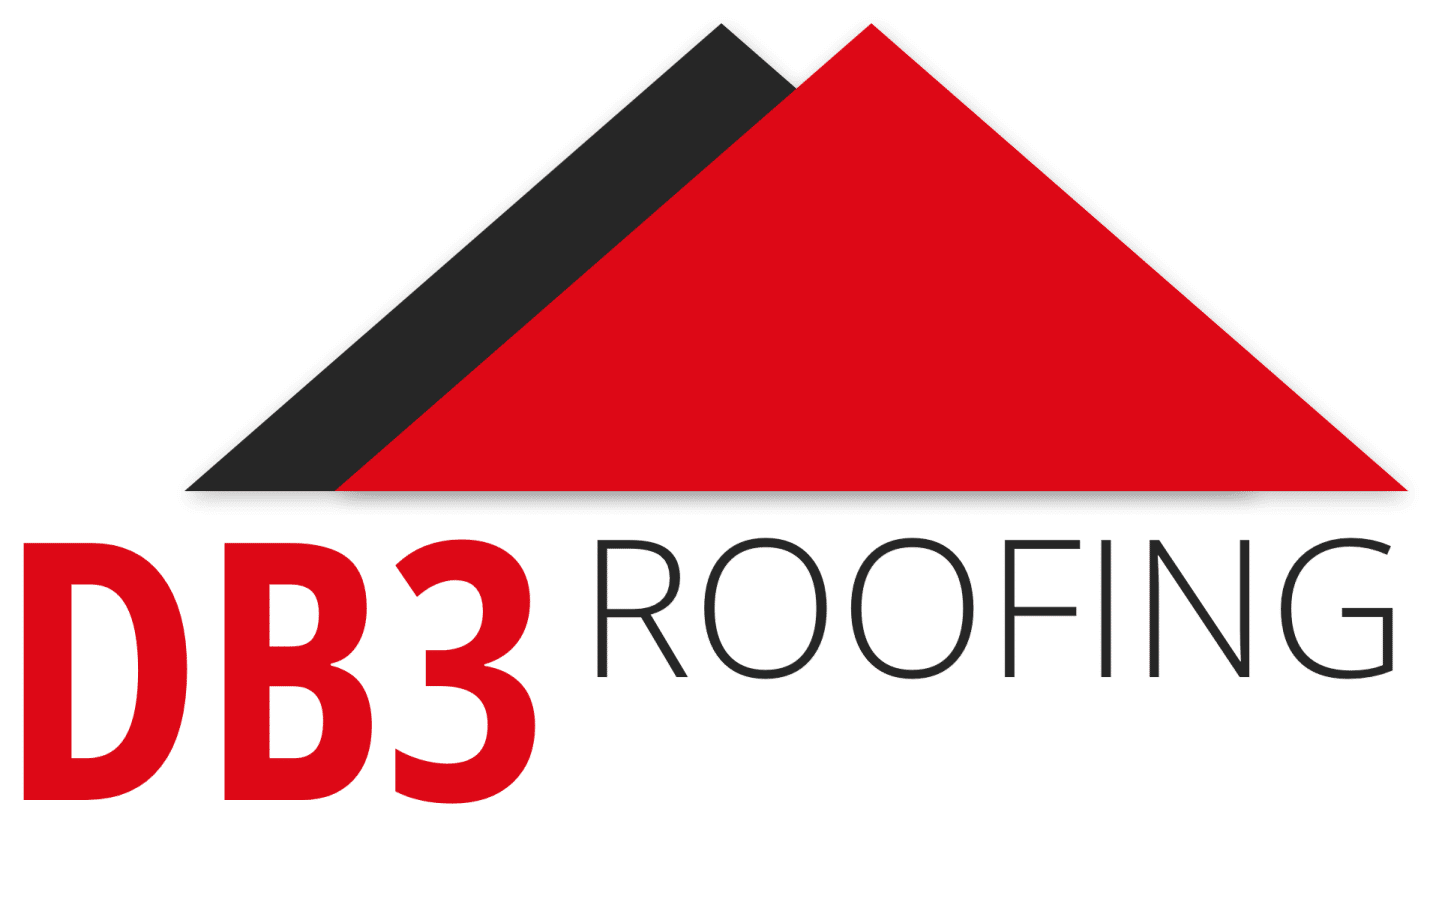 DB3 Roofing